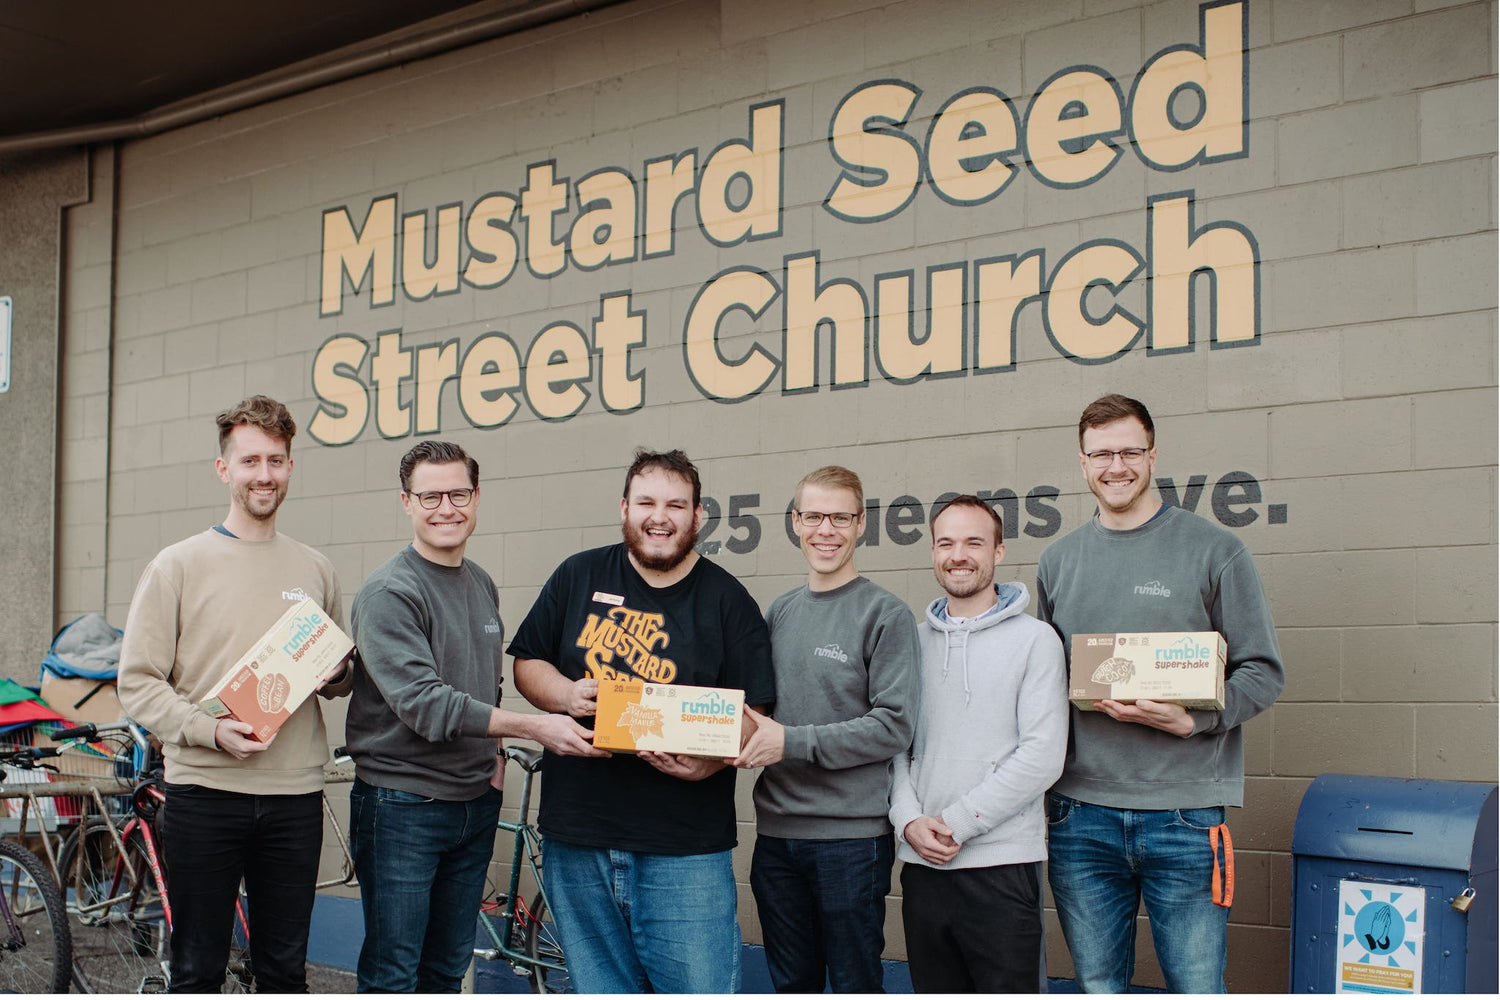 Rumble Supershake Donates over 10,000 Nutritional Drinks to The Mustard Seed of Victoria